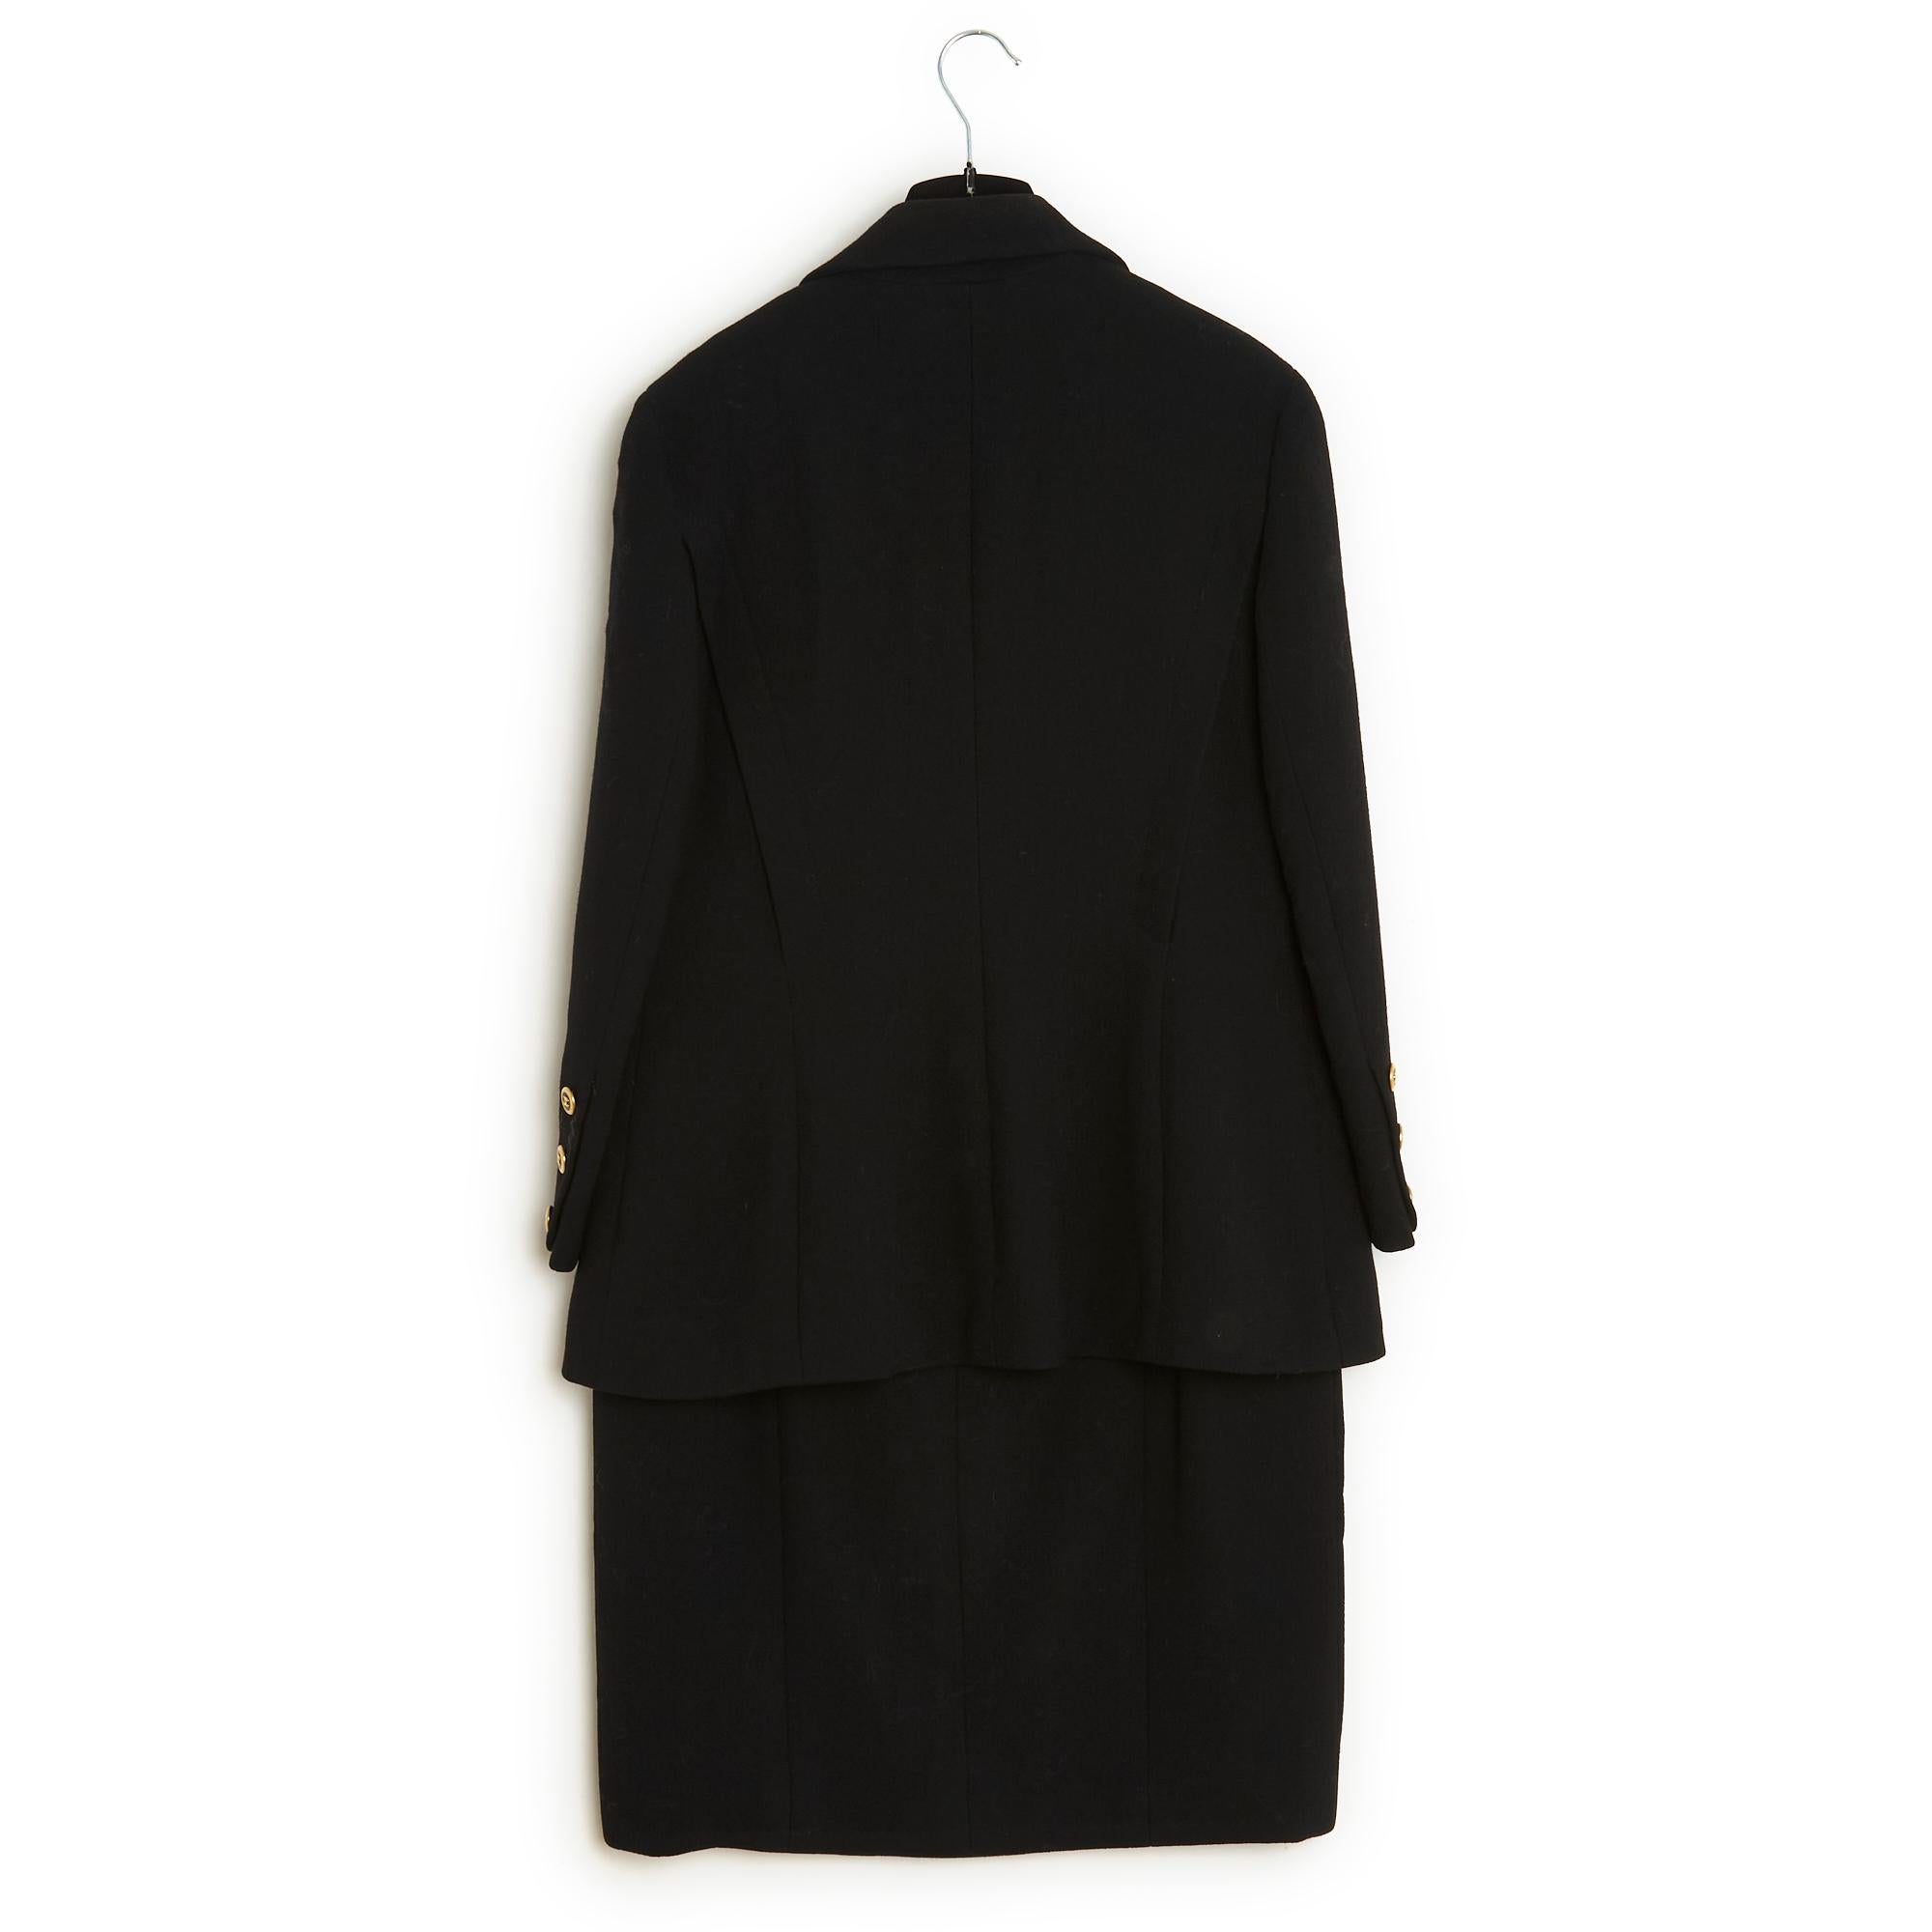 Late 80s Chanel black Wool Classic 'CC' Jacket Ensemble FR40 US10 For Sale 3